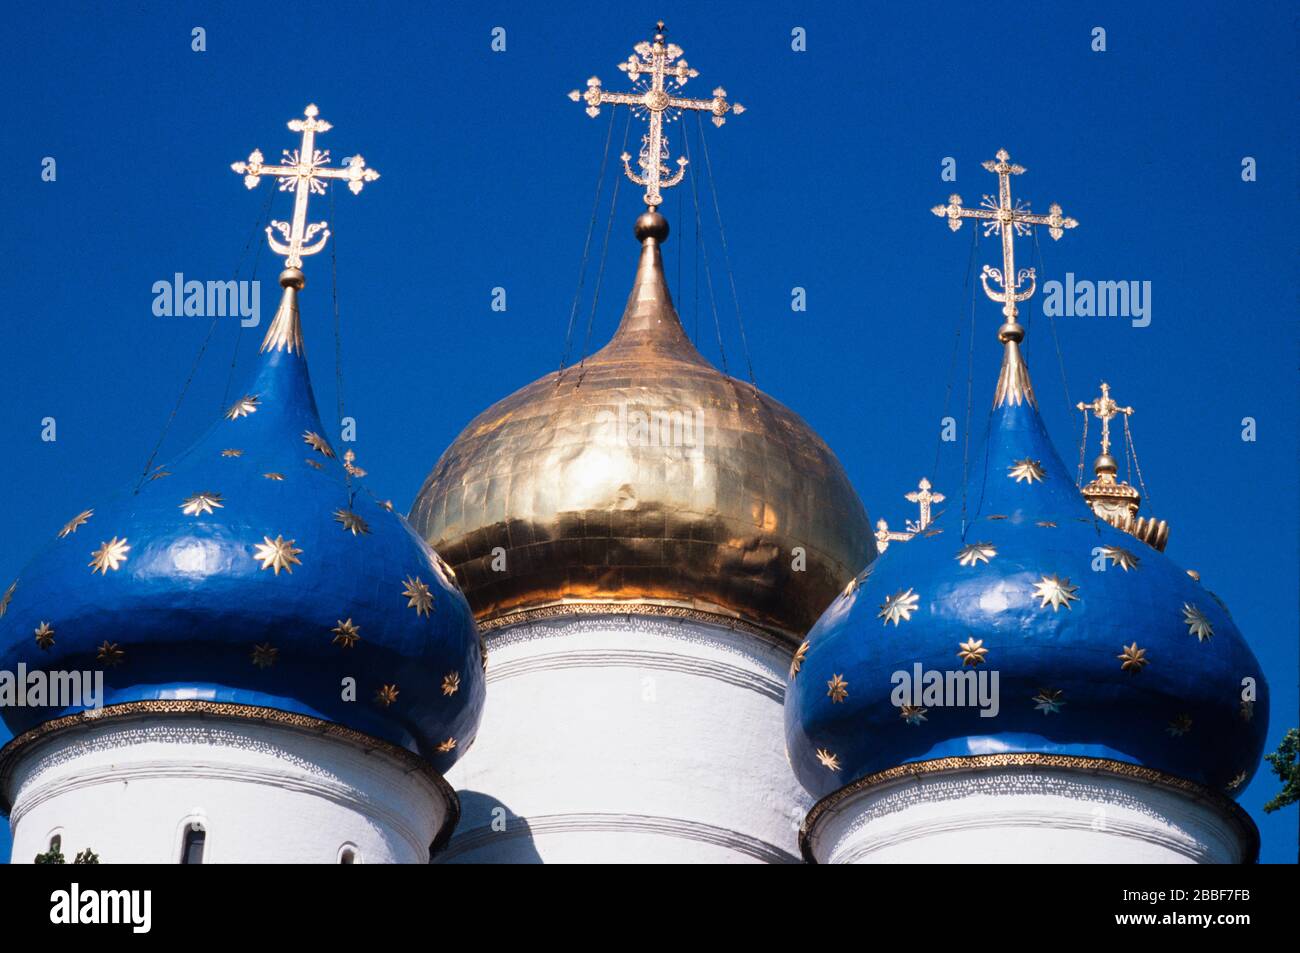 Domes of the Trinity Lavra of St. Sergius, the most important Russian monastery of the Russian Orthodox Church, in Sergiyev Posad, 70 km from Moscow. Stock Photo